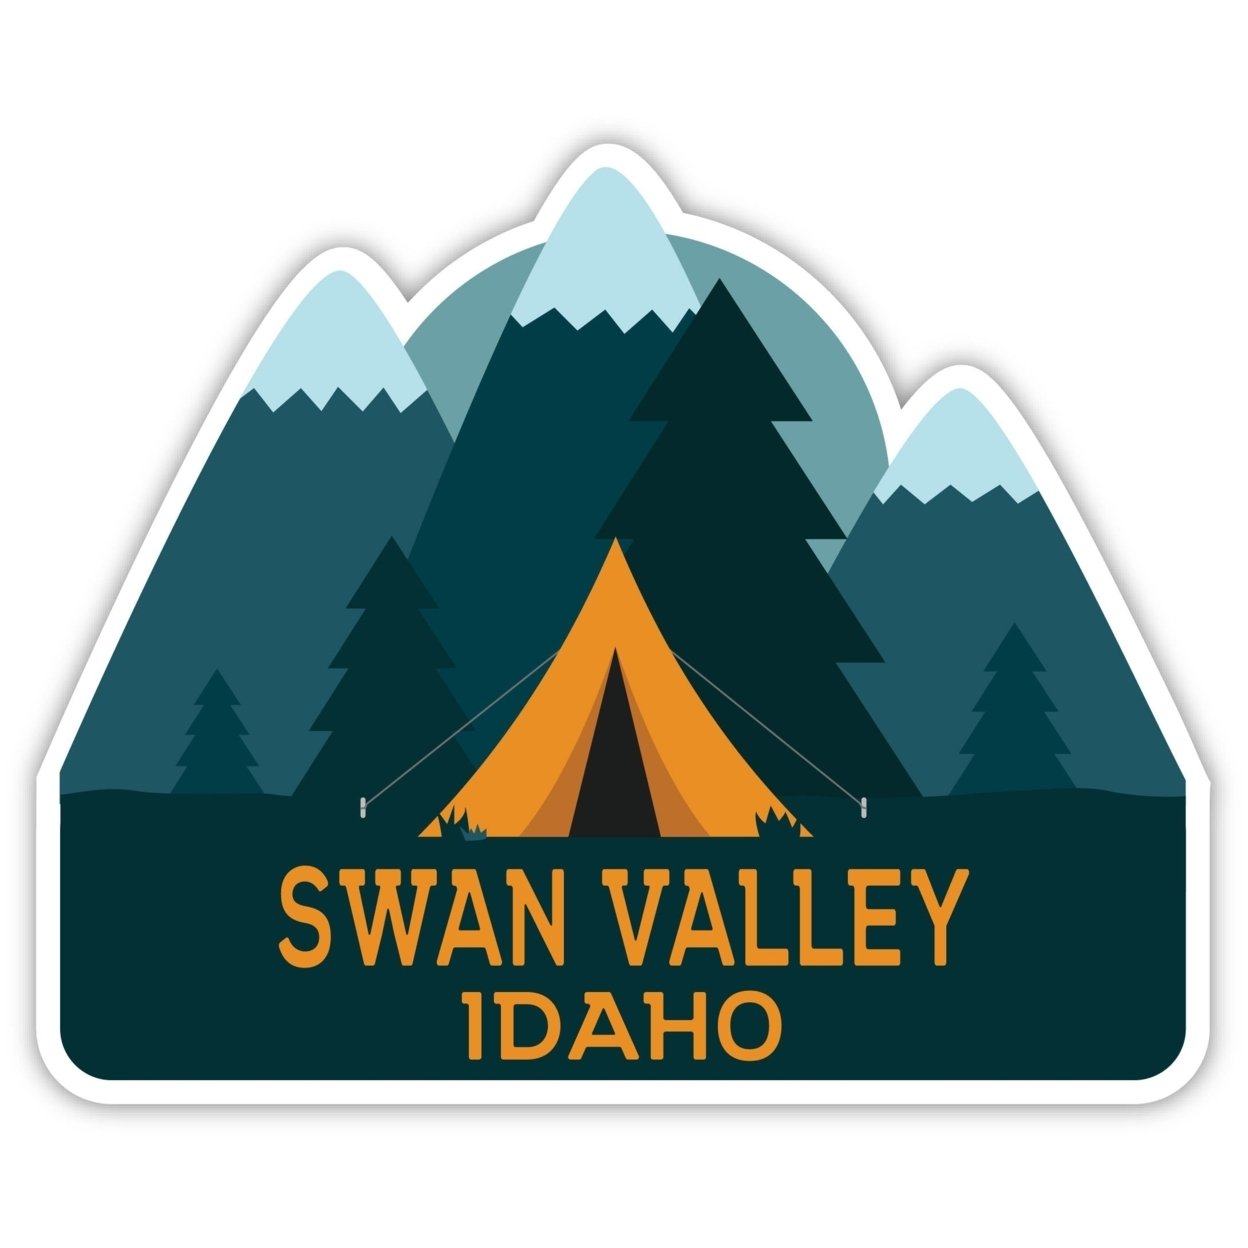 Swan Valley Idaho Souvenir Decorative Stickers (Choose Theme And Size) - Single Unit, 2-Inch, Tent